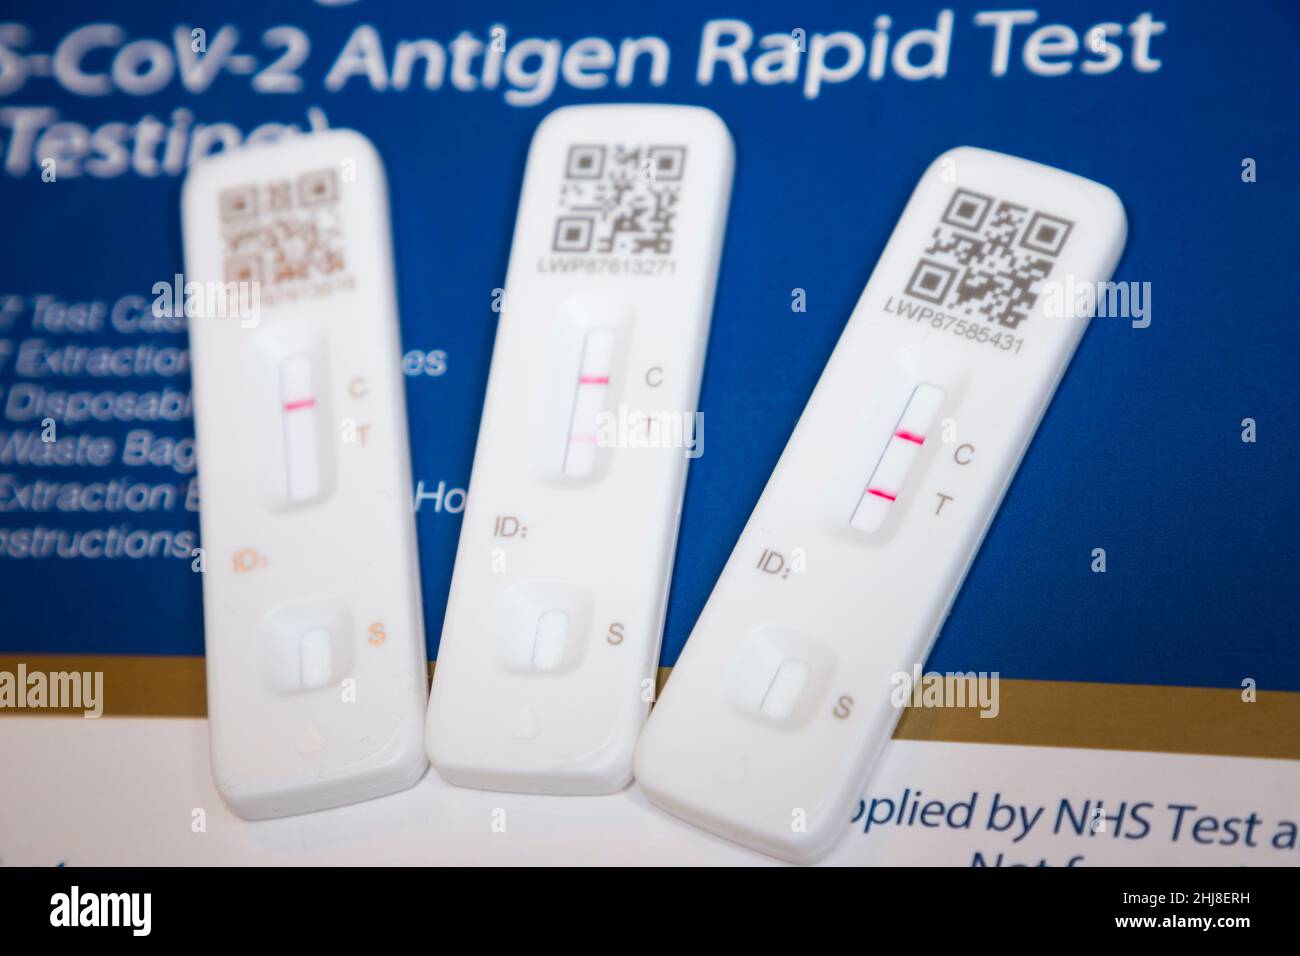 Two positive results and a single negative test result. Three Lateral flow test / LFT / LFD / lateral flow devices kits / device kit, two of which have tested positive (showing two red lines) for COVID 19 virus coronavirus during antigen home testing, in London. UK. To show positive, two red lines will appear. One test shows the positive line to be feint / faint. The third test showing one line only is a negative test. The test (by Flowfex made in China) has detected virus in the sample nasal swab taken from the nose. (128) Stock Photo